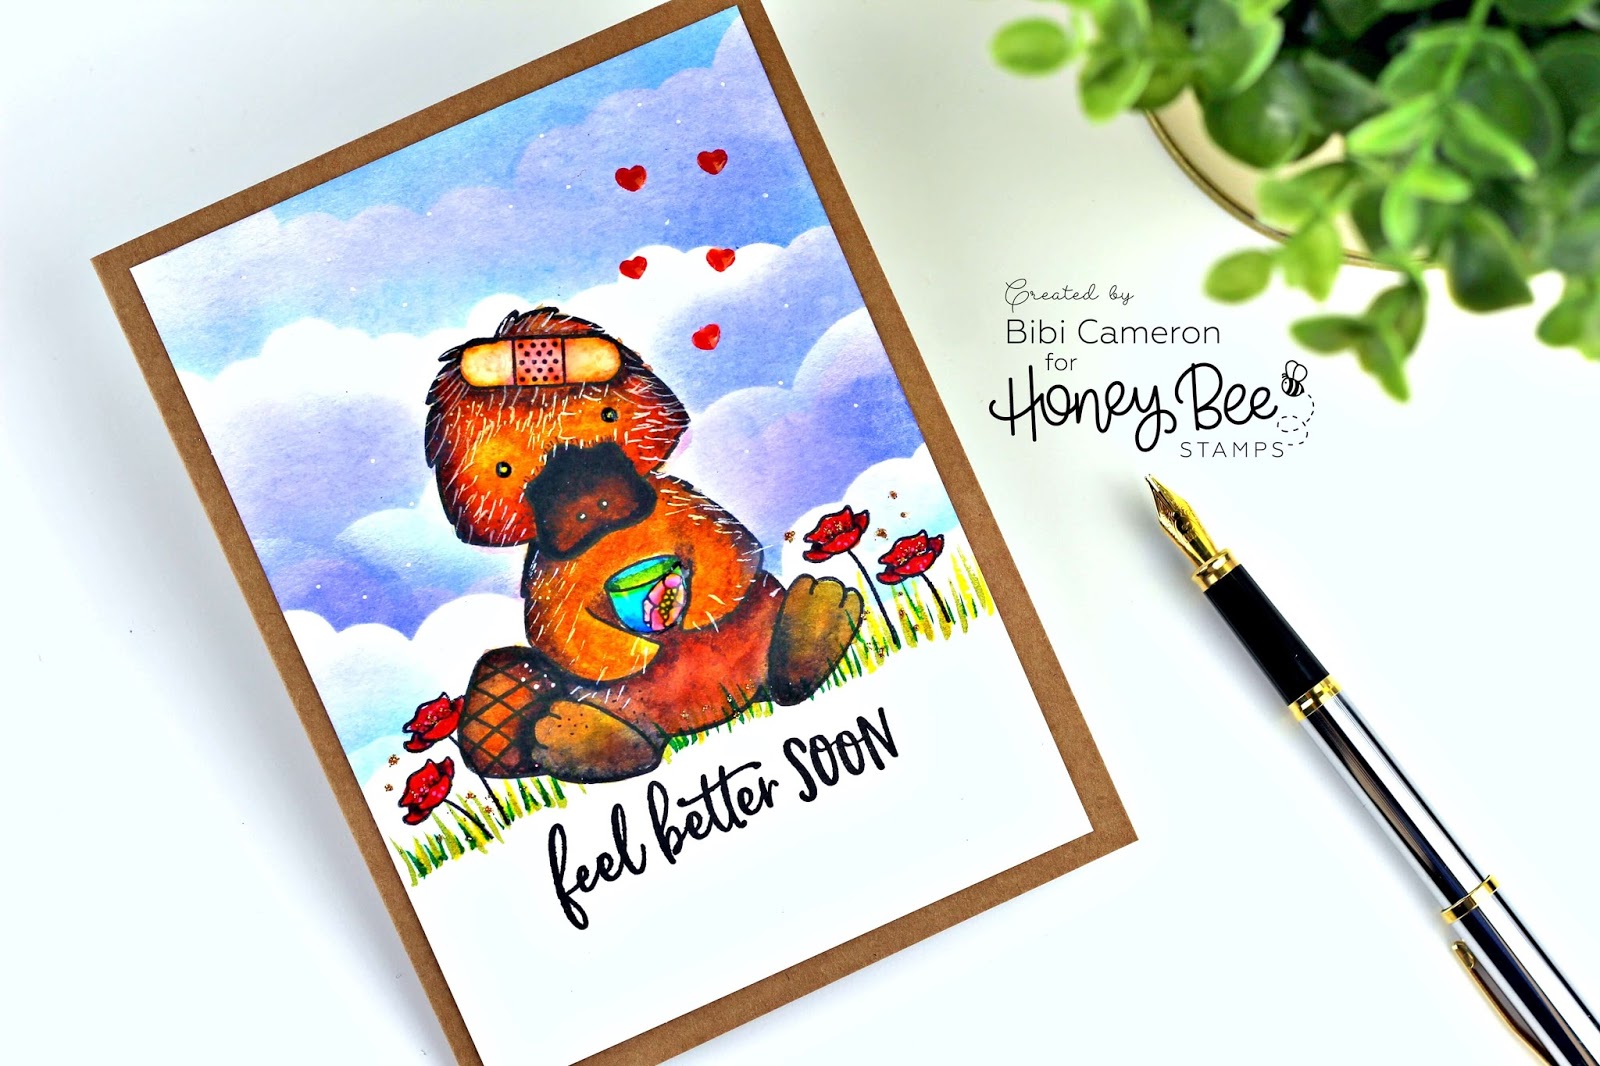 Feel Better Soon Card | Penny the Platypus Honey Bee Stamps